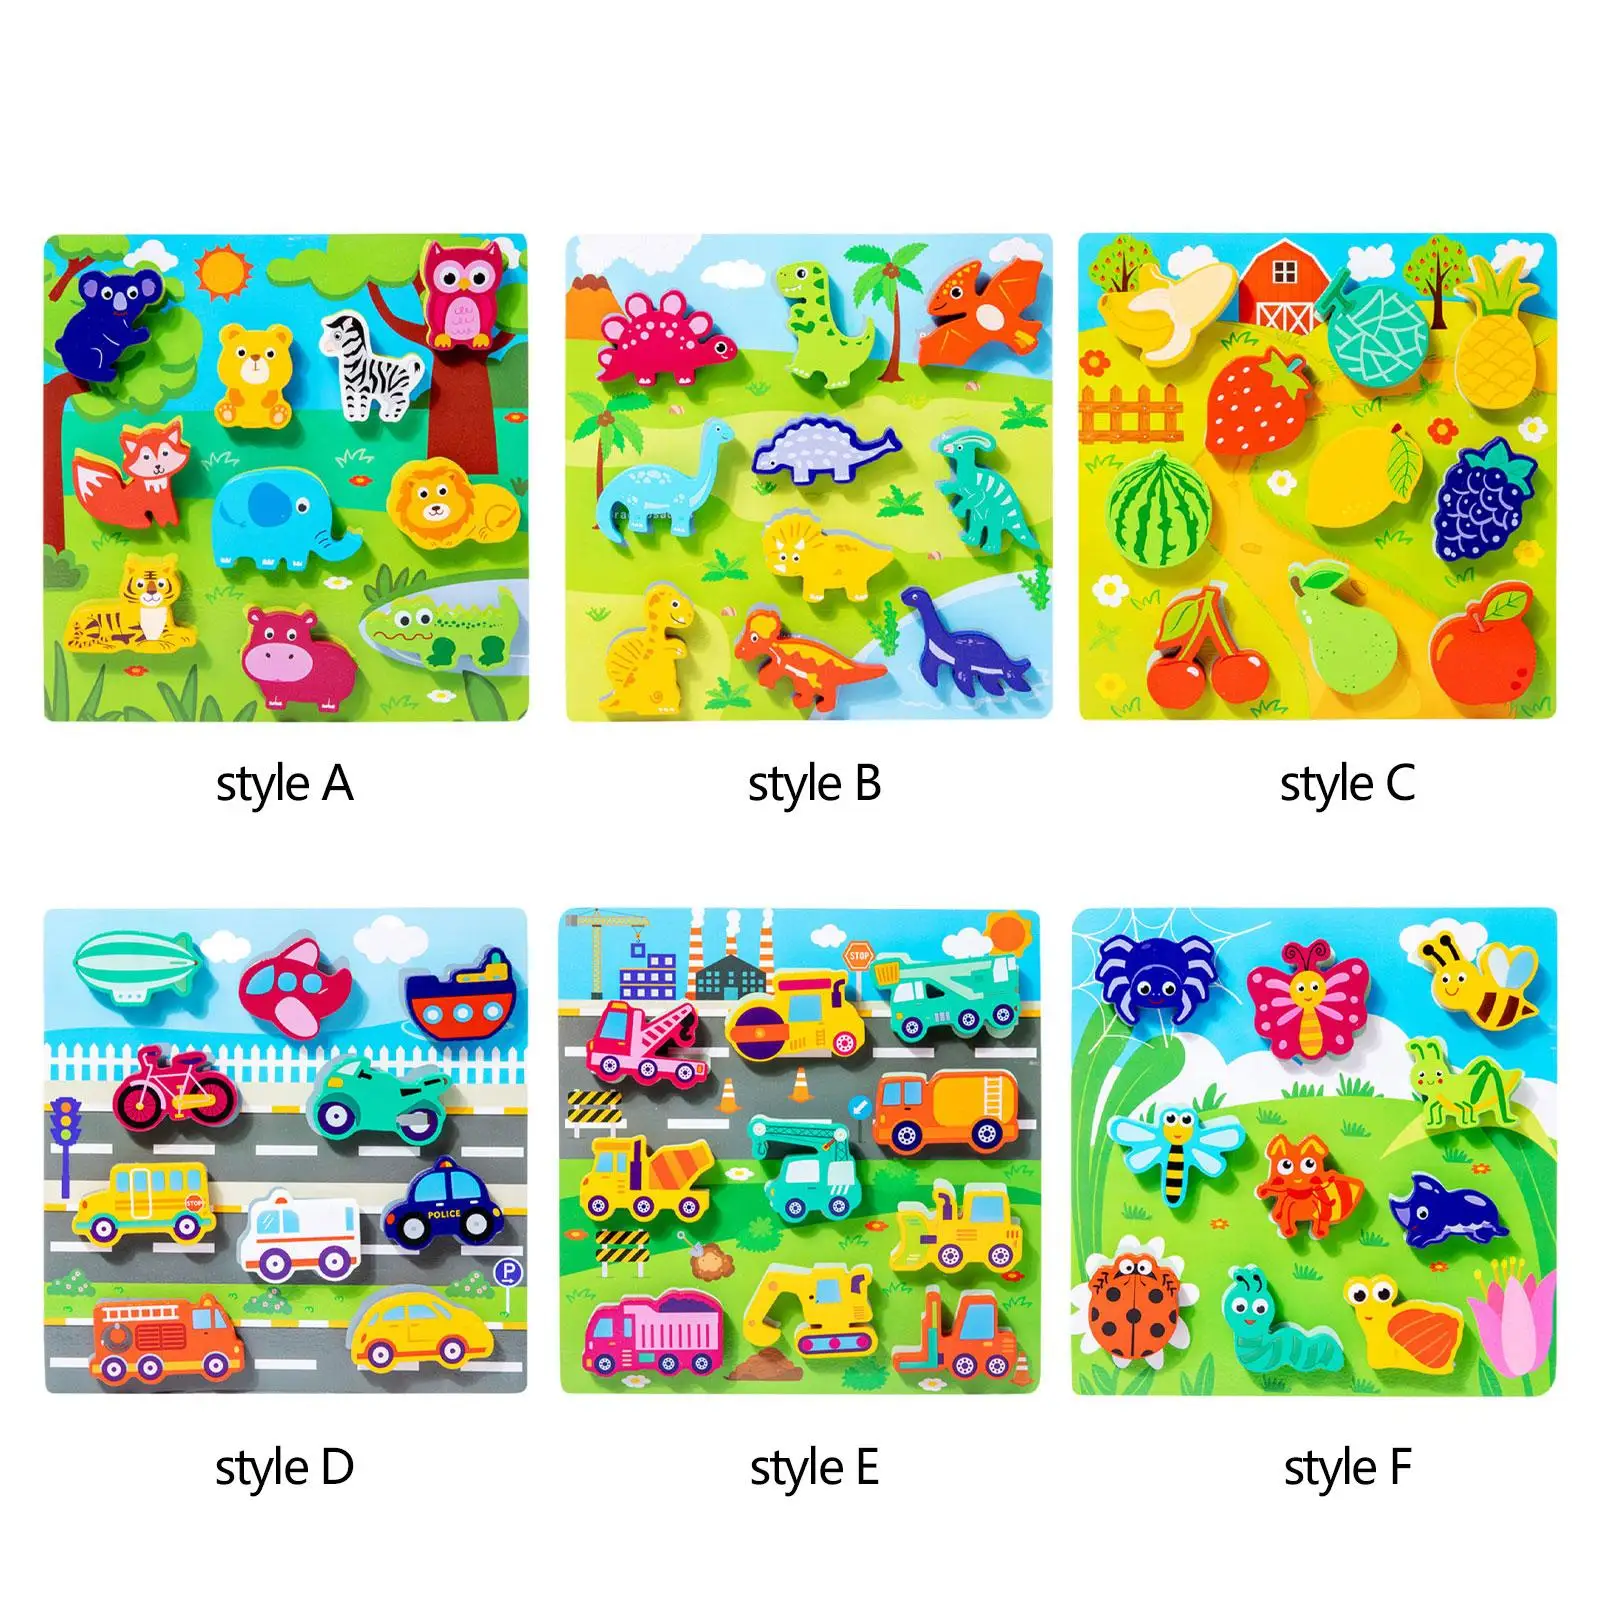 

Wooden Matching Jigsaw Puzzle Preschool Learning Activities Montessori Toys for Girls Boys Kids 1 2 3 Year Old Toddlers Gift